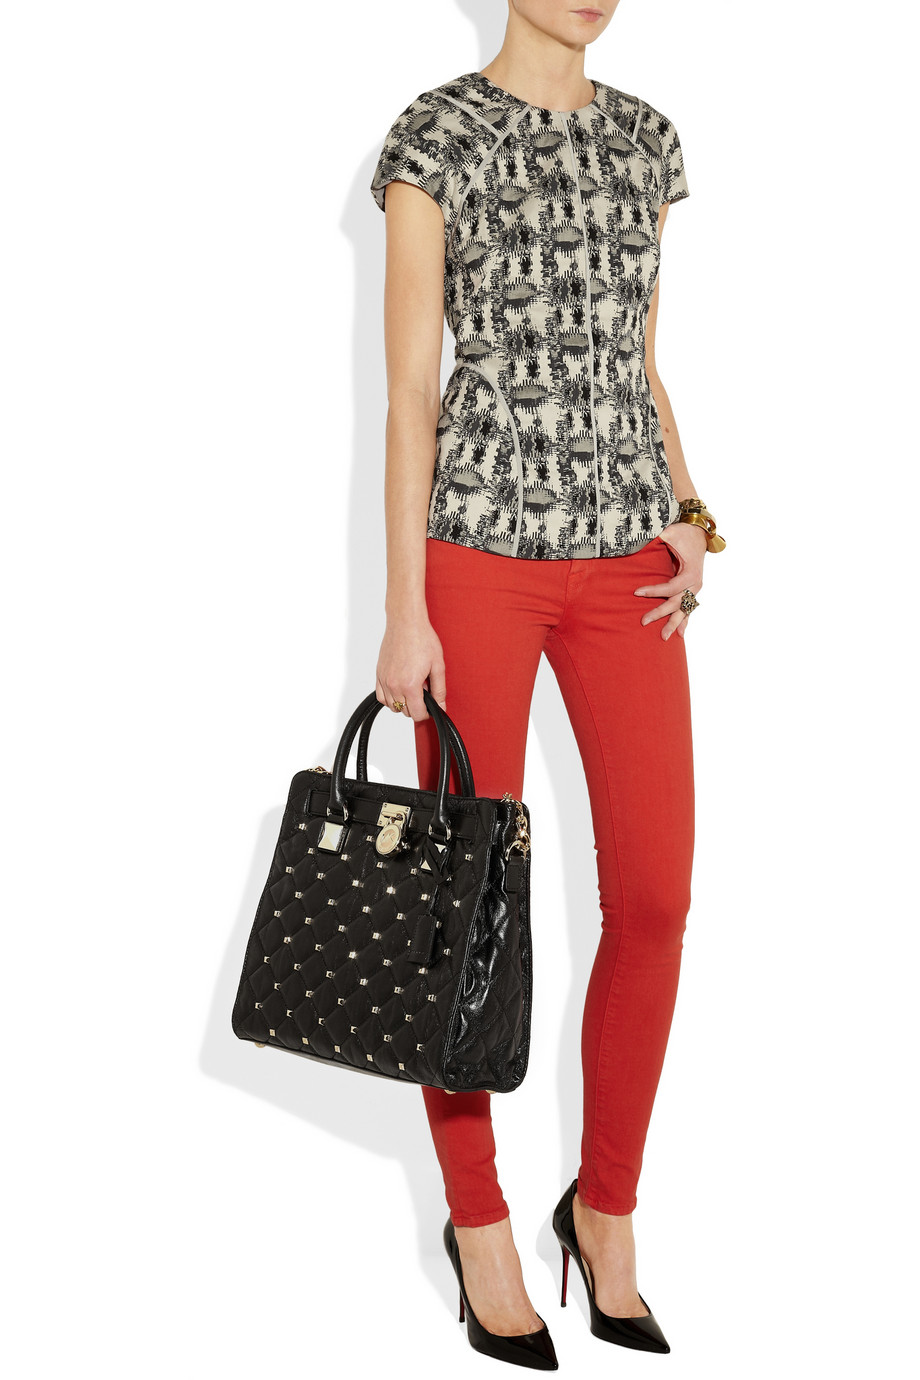 MICHAEL Michael Kors Hamilton Studded Quilted Leather Tote in